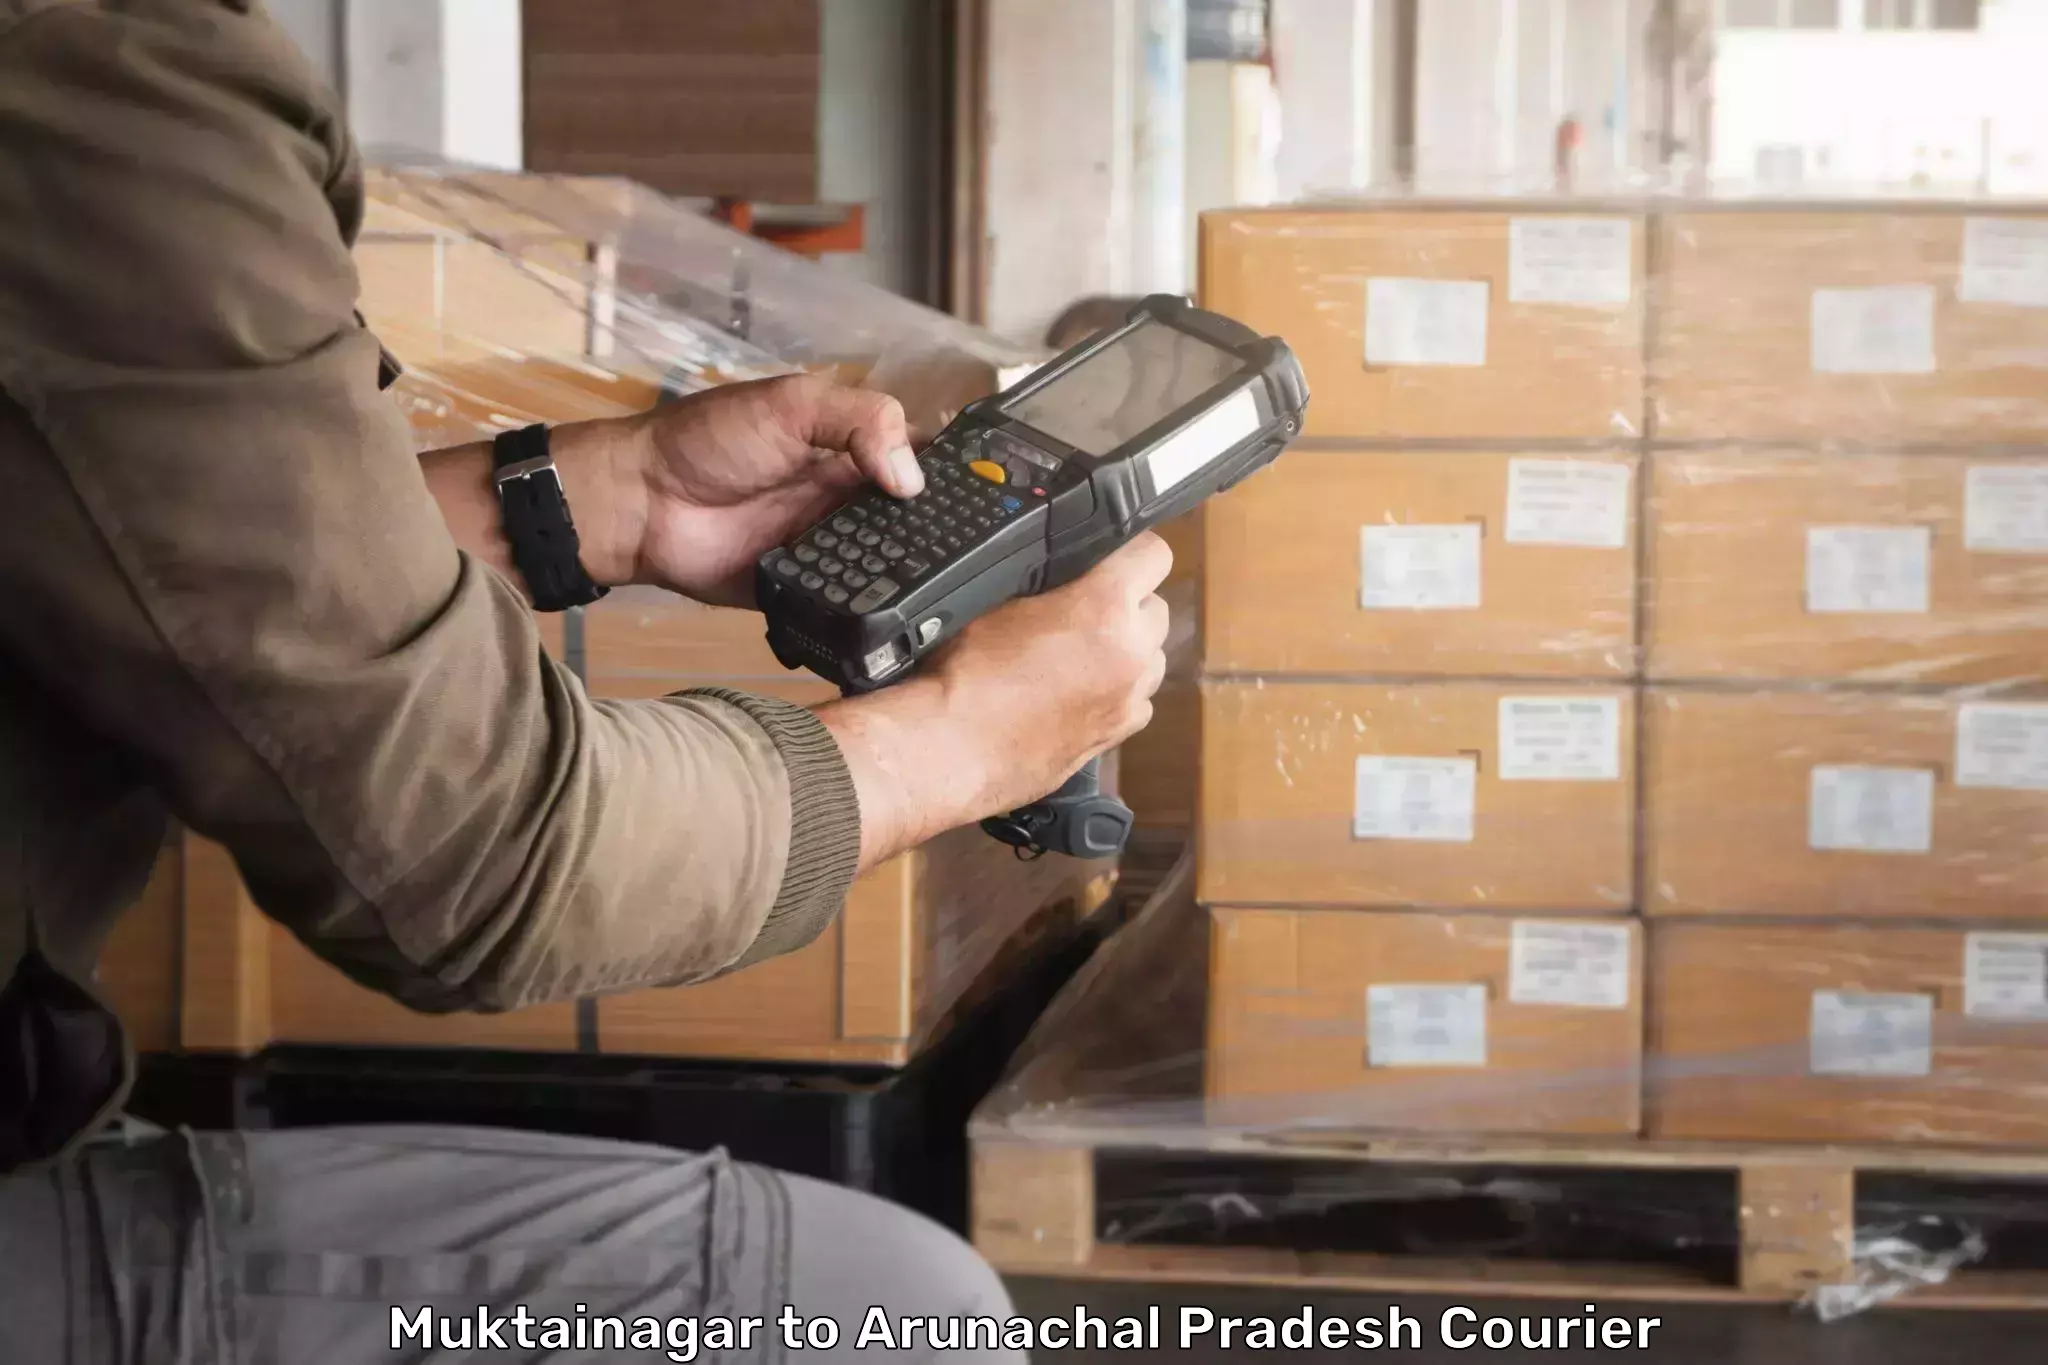 Global courier networks Muktainagar to Changlang